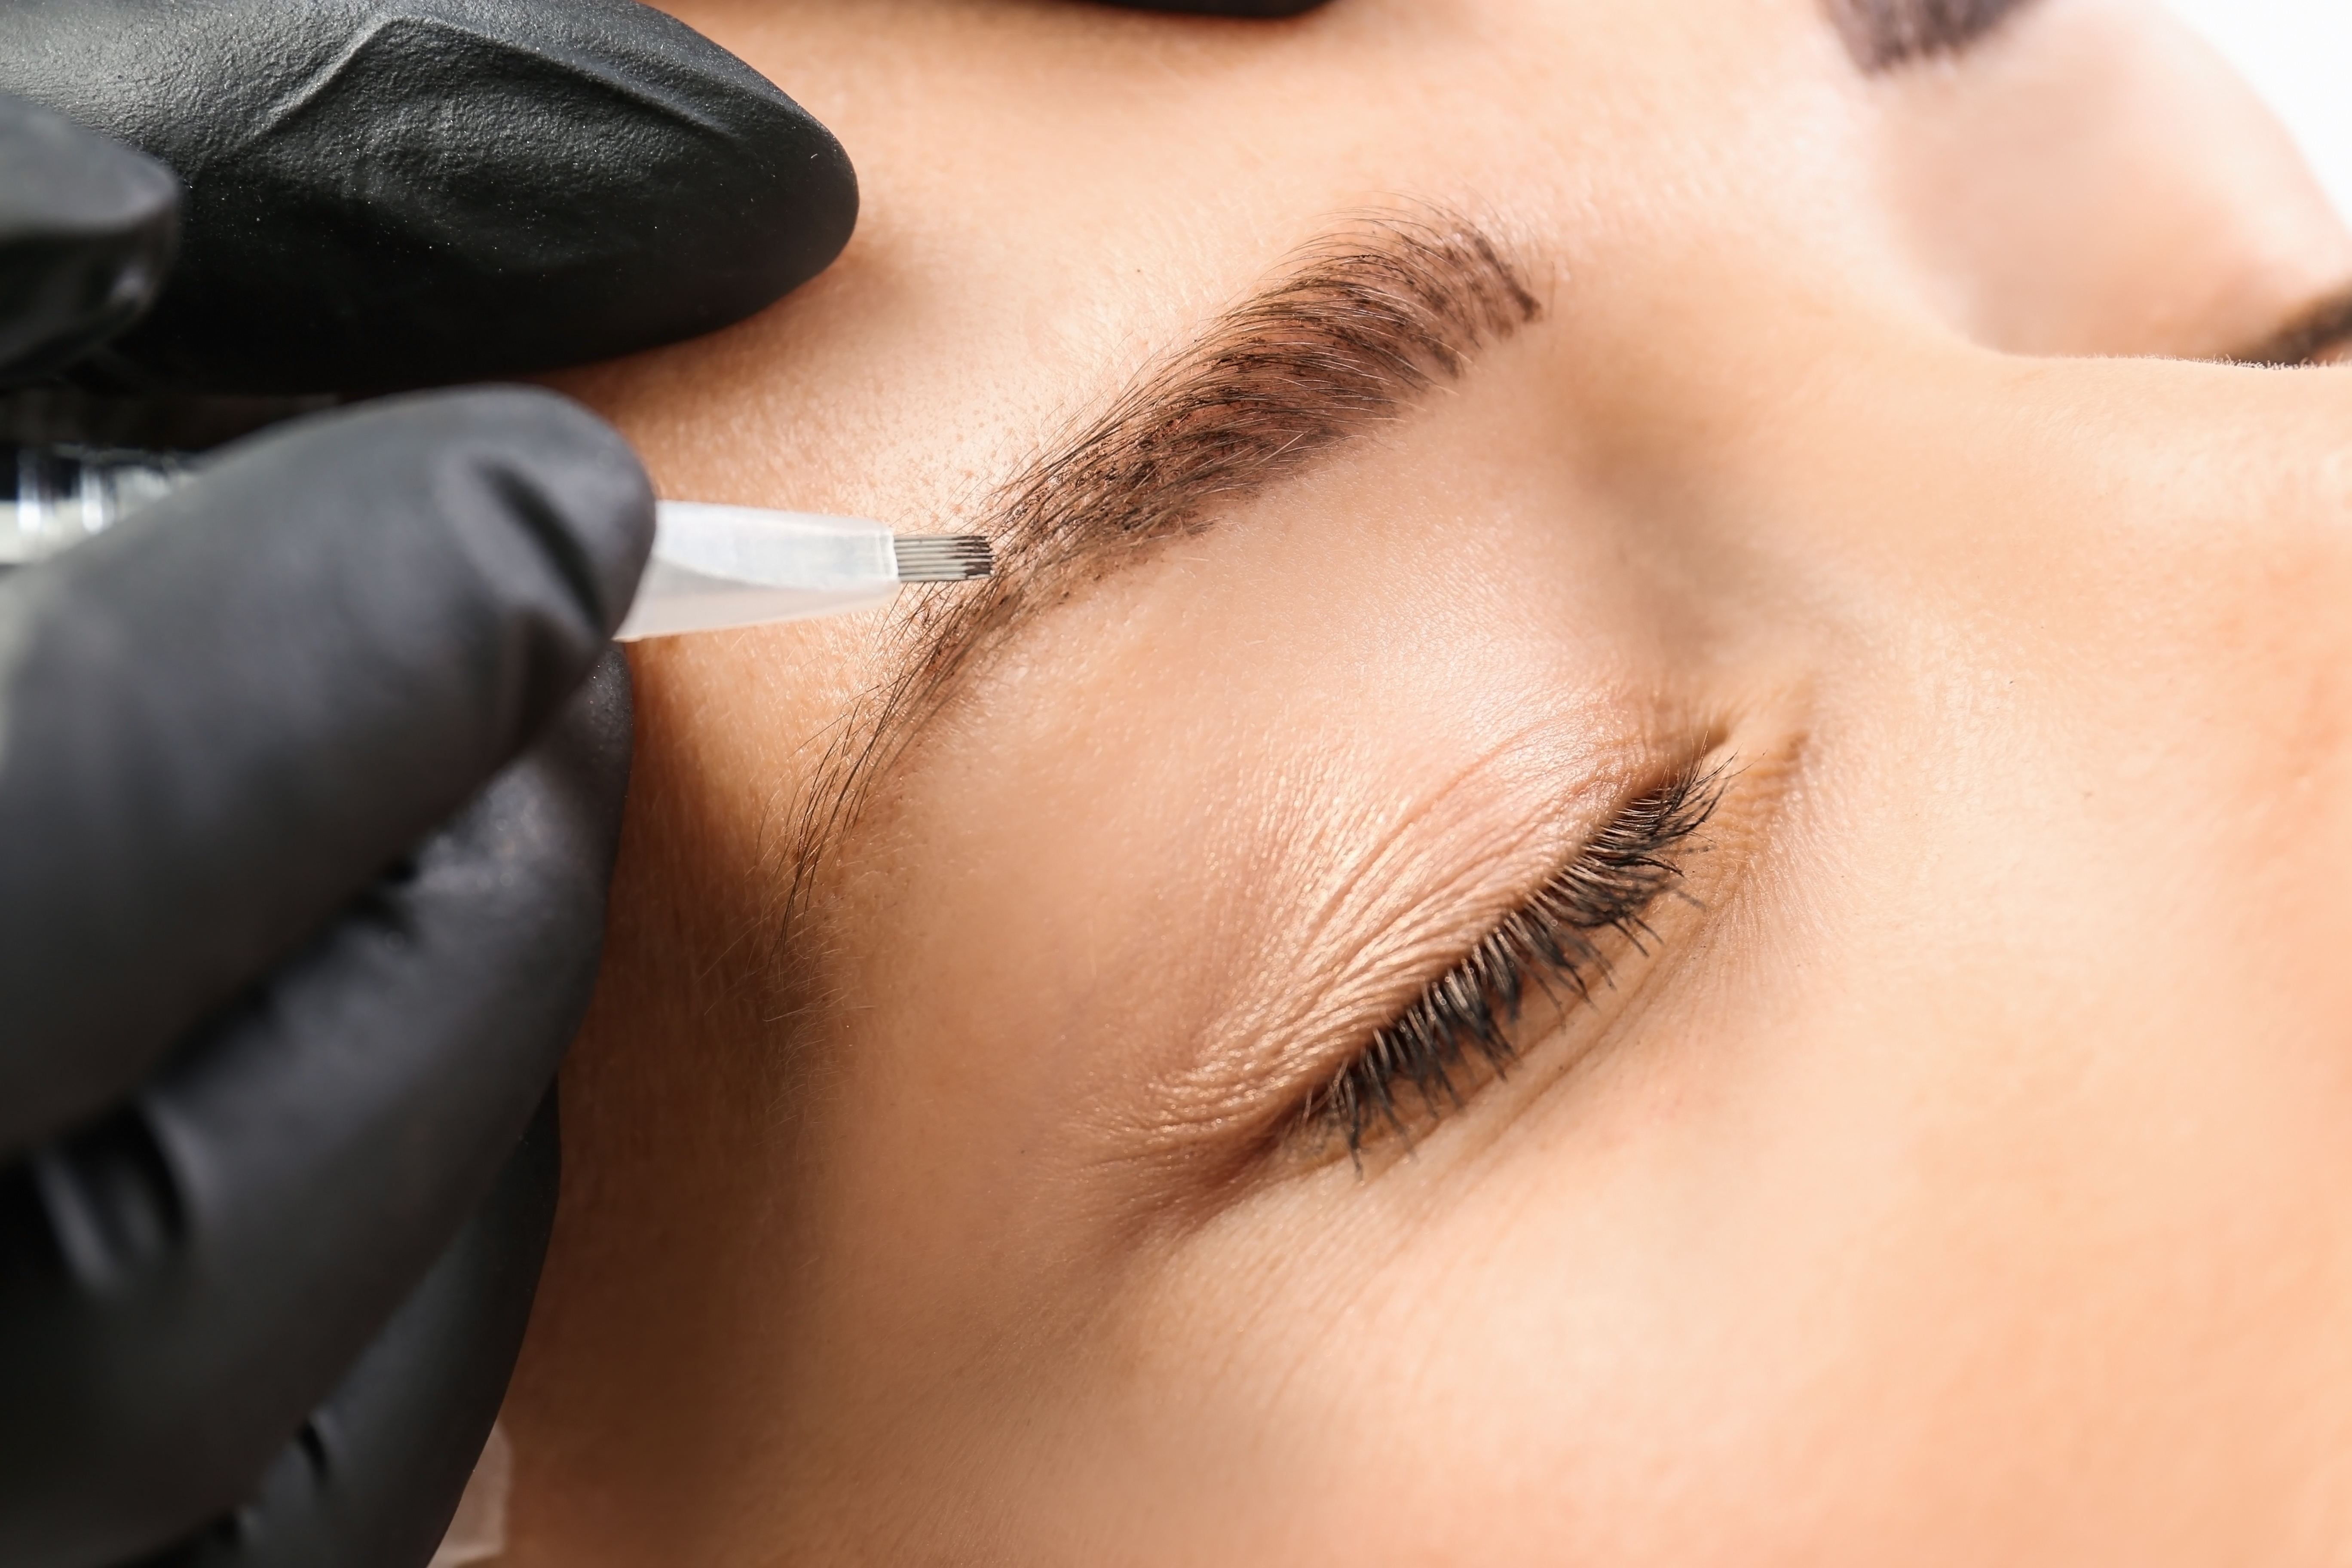 How Is Microblading Different from Eyebrow Tattooing?